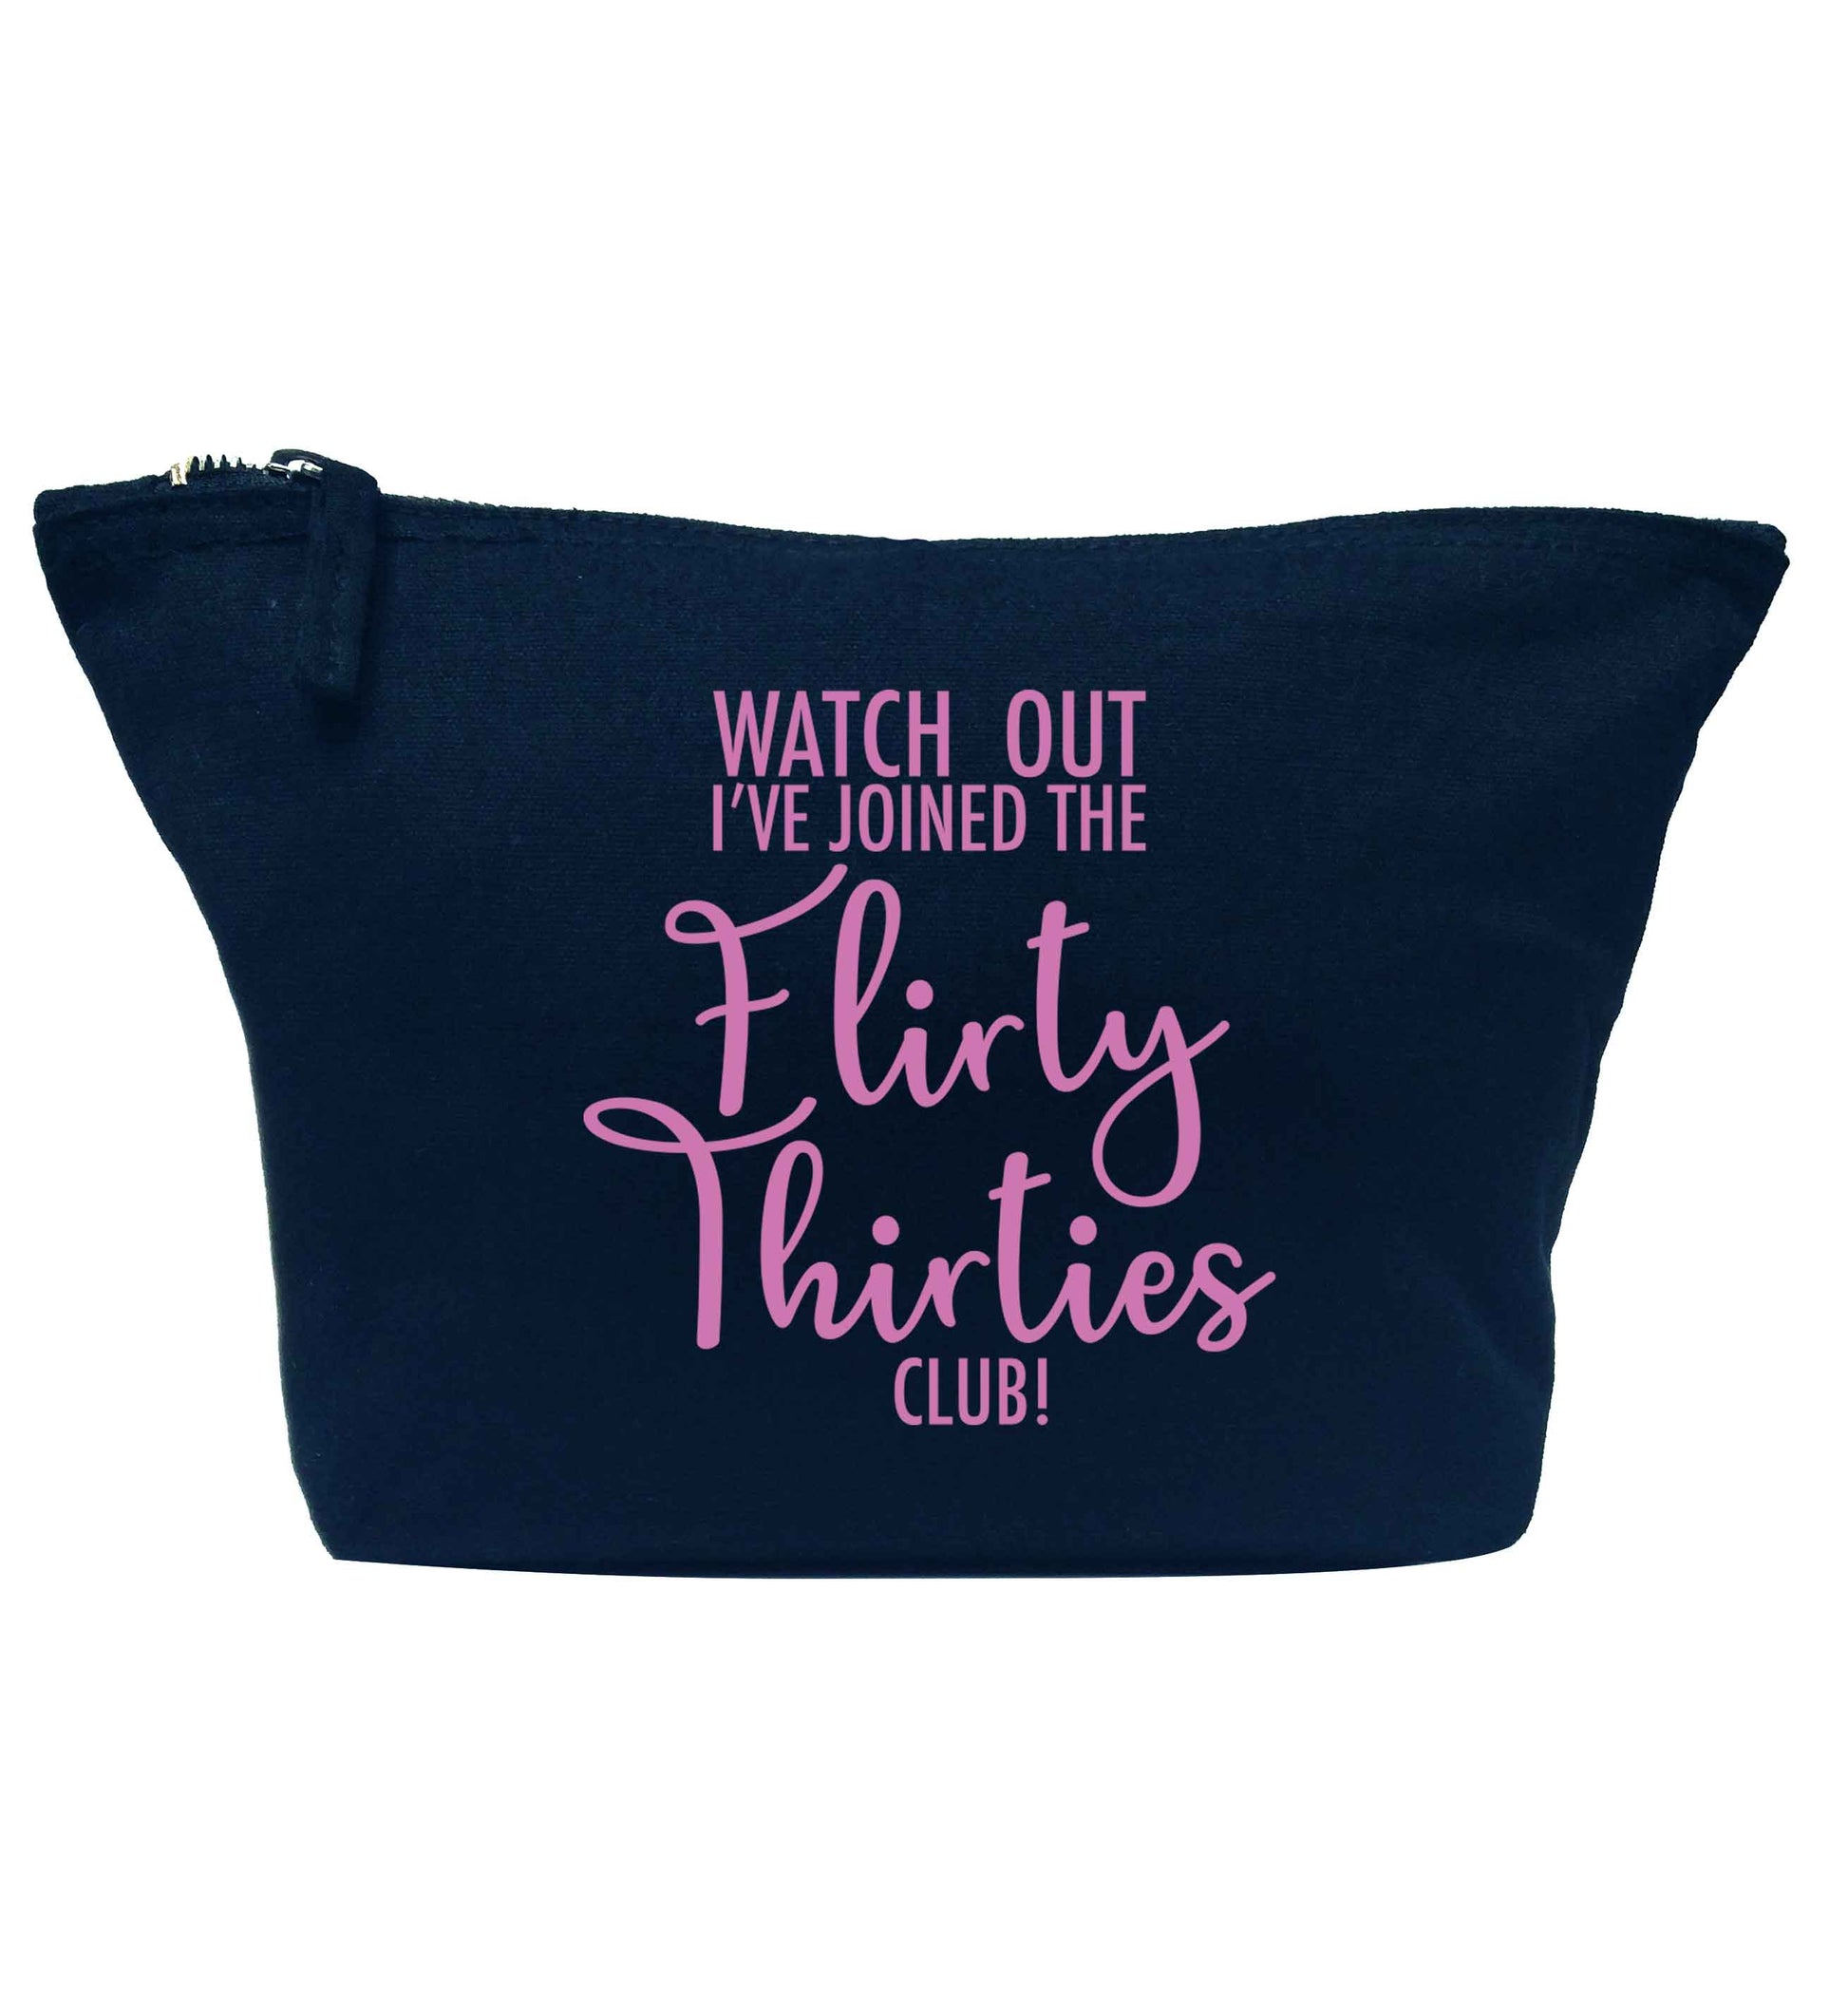 Watch out I've joined the flirty thirties club navy makeup bag